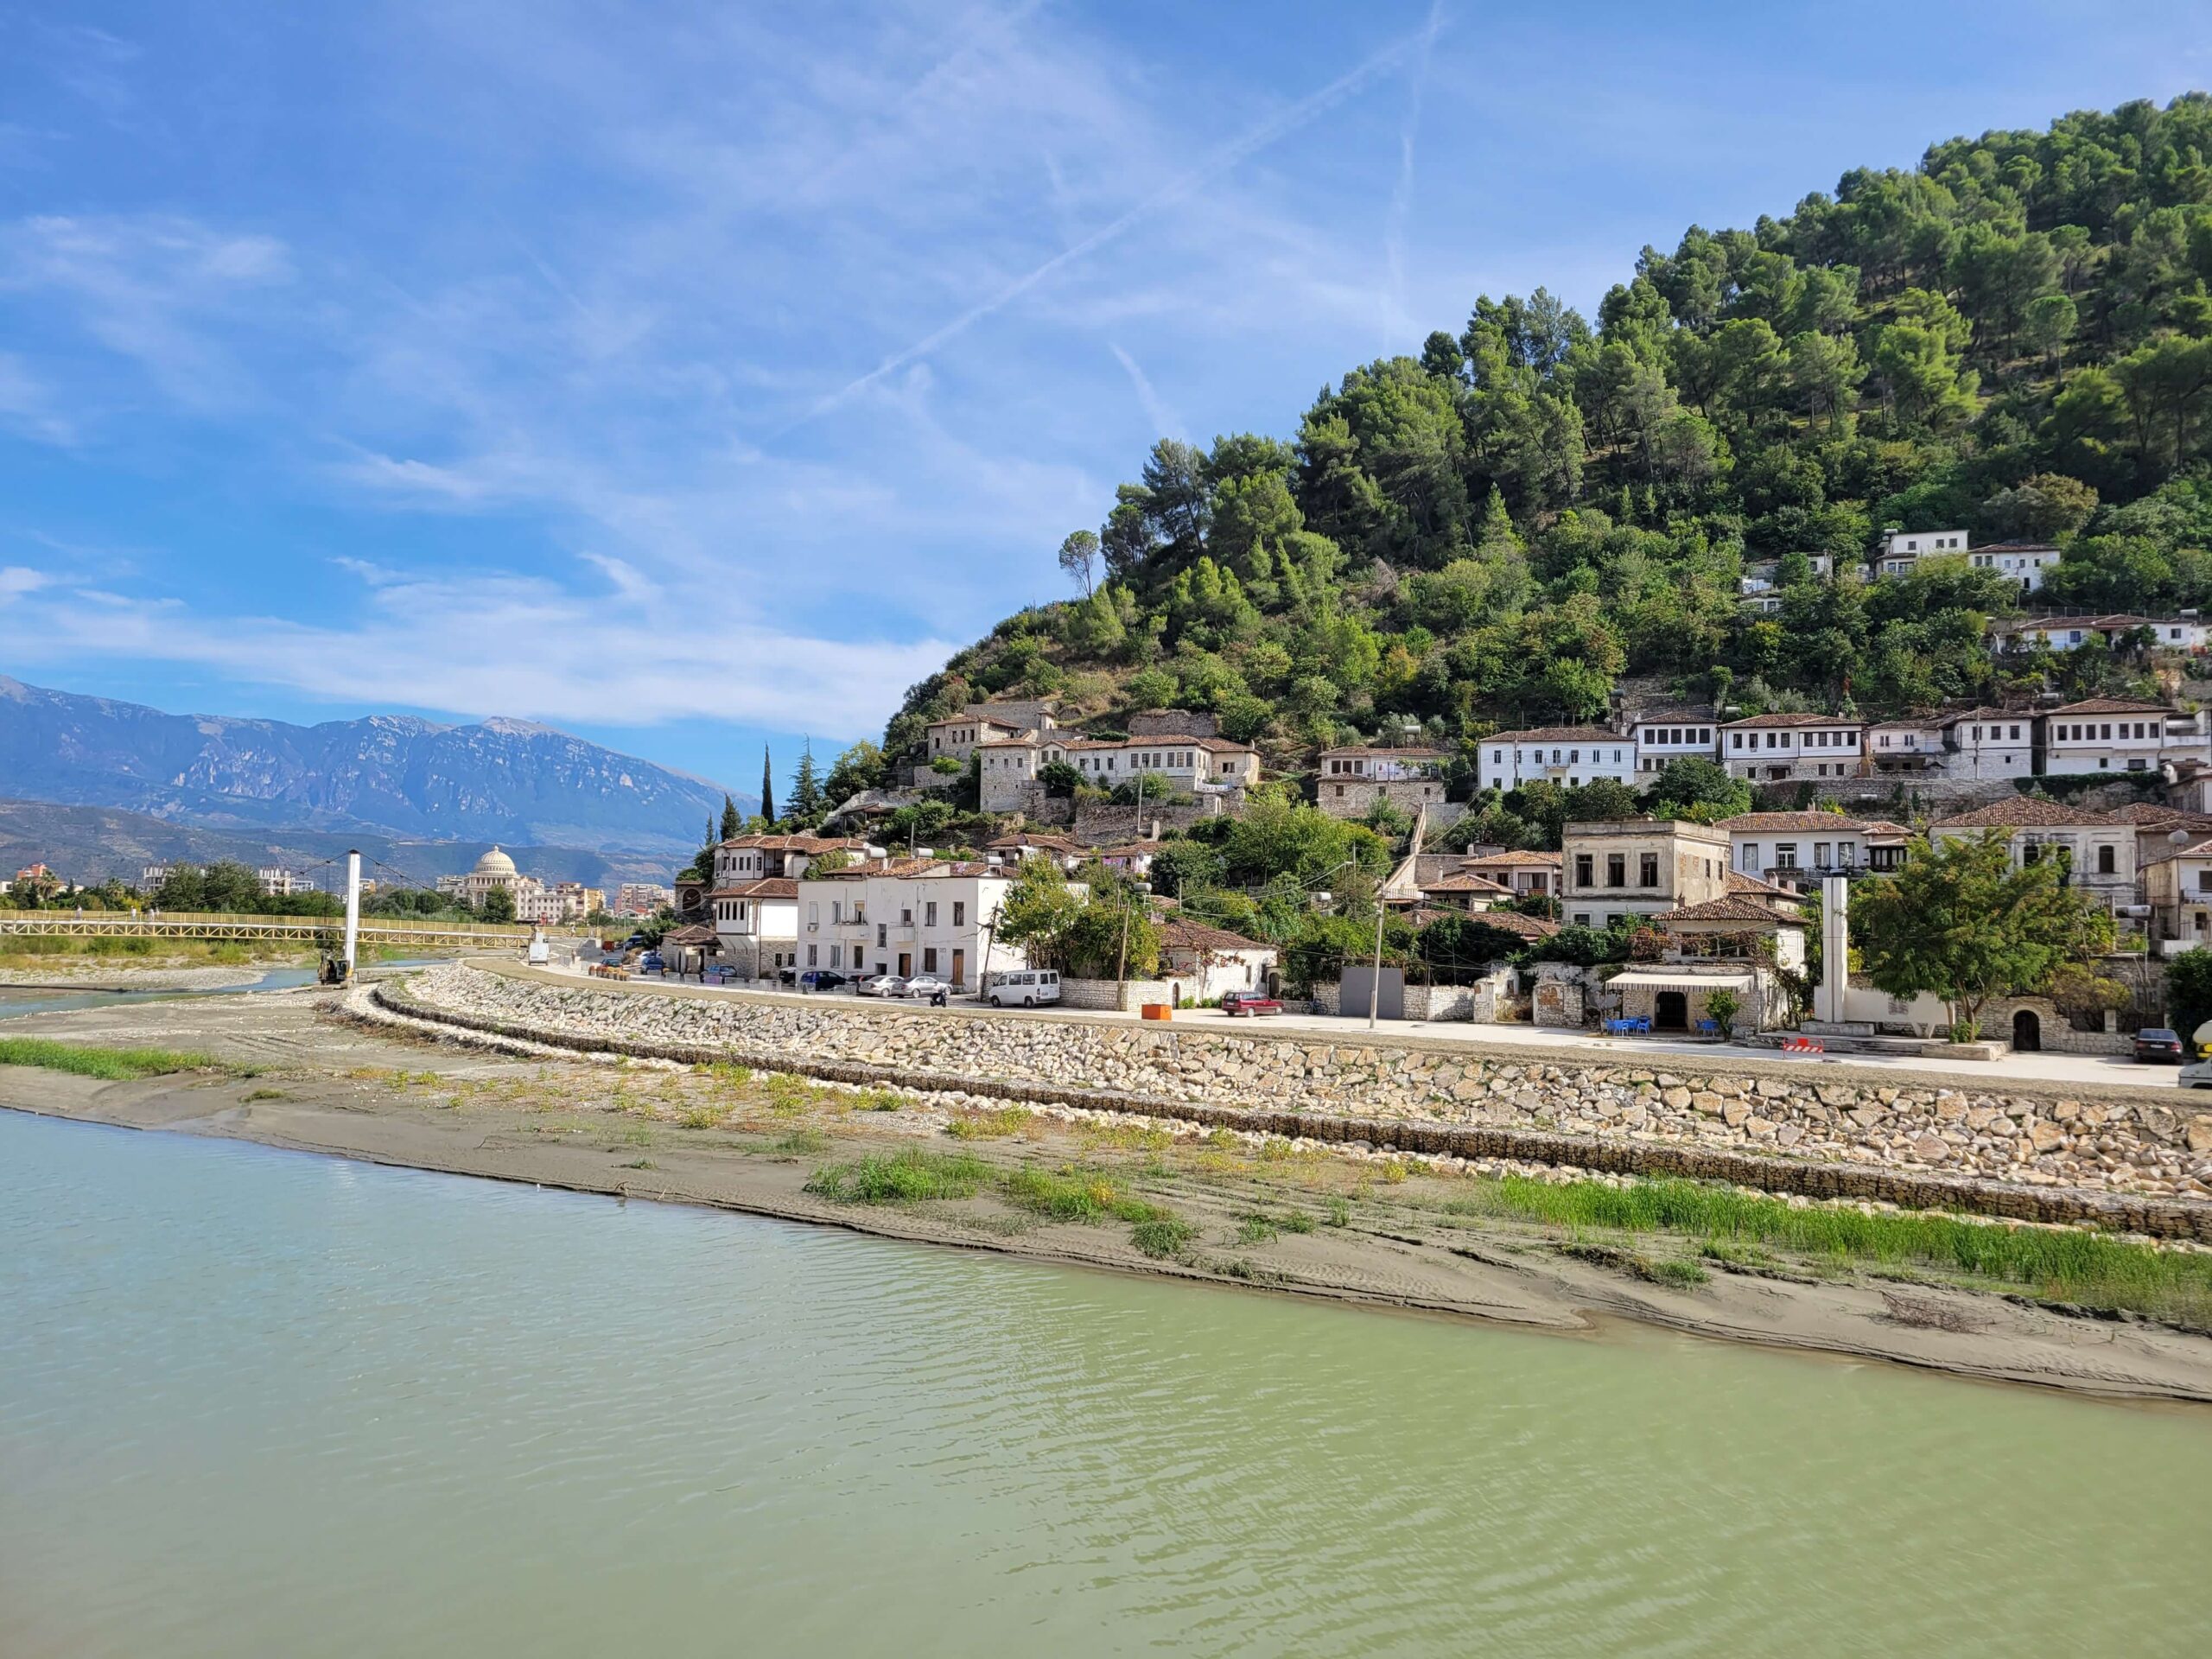 Use this travel guide to build a 3 day trip to Berat.